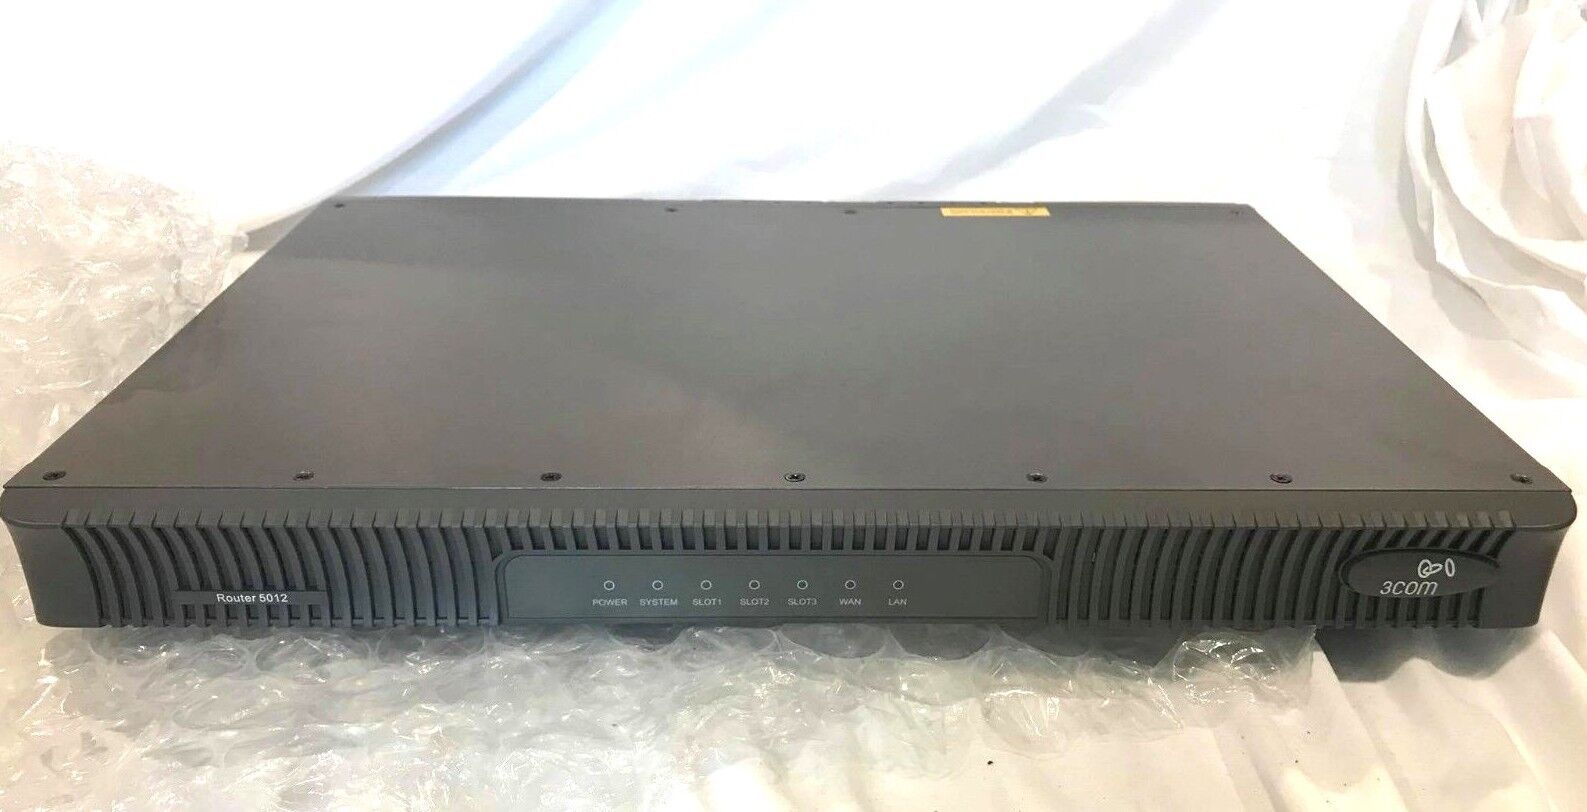 3Com Router 5012 Chassis Model 3C13701